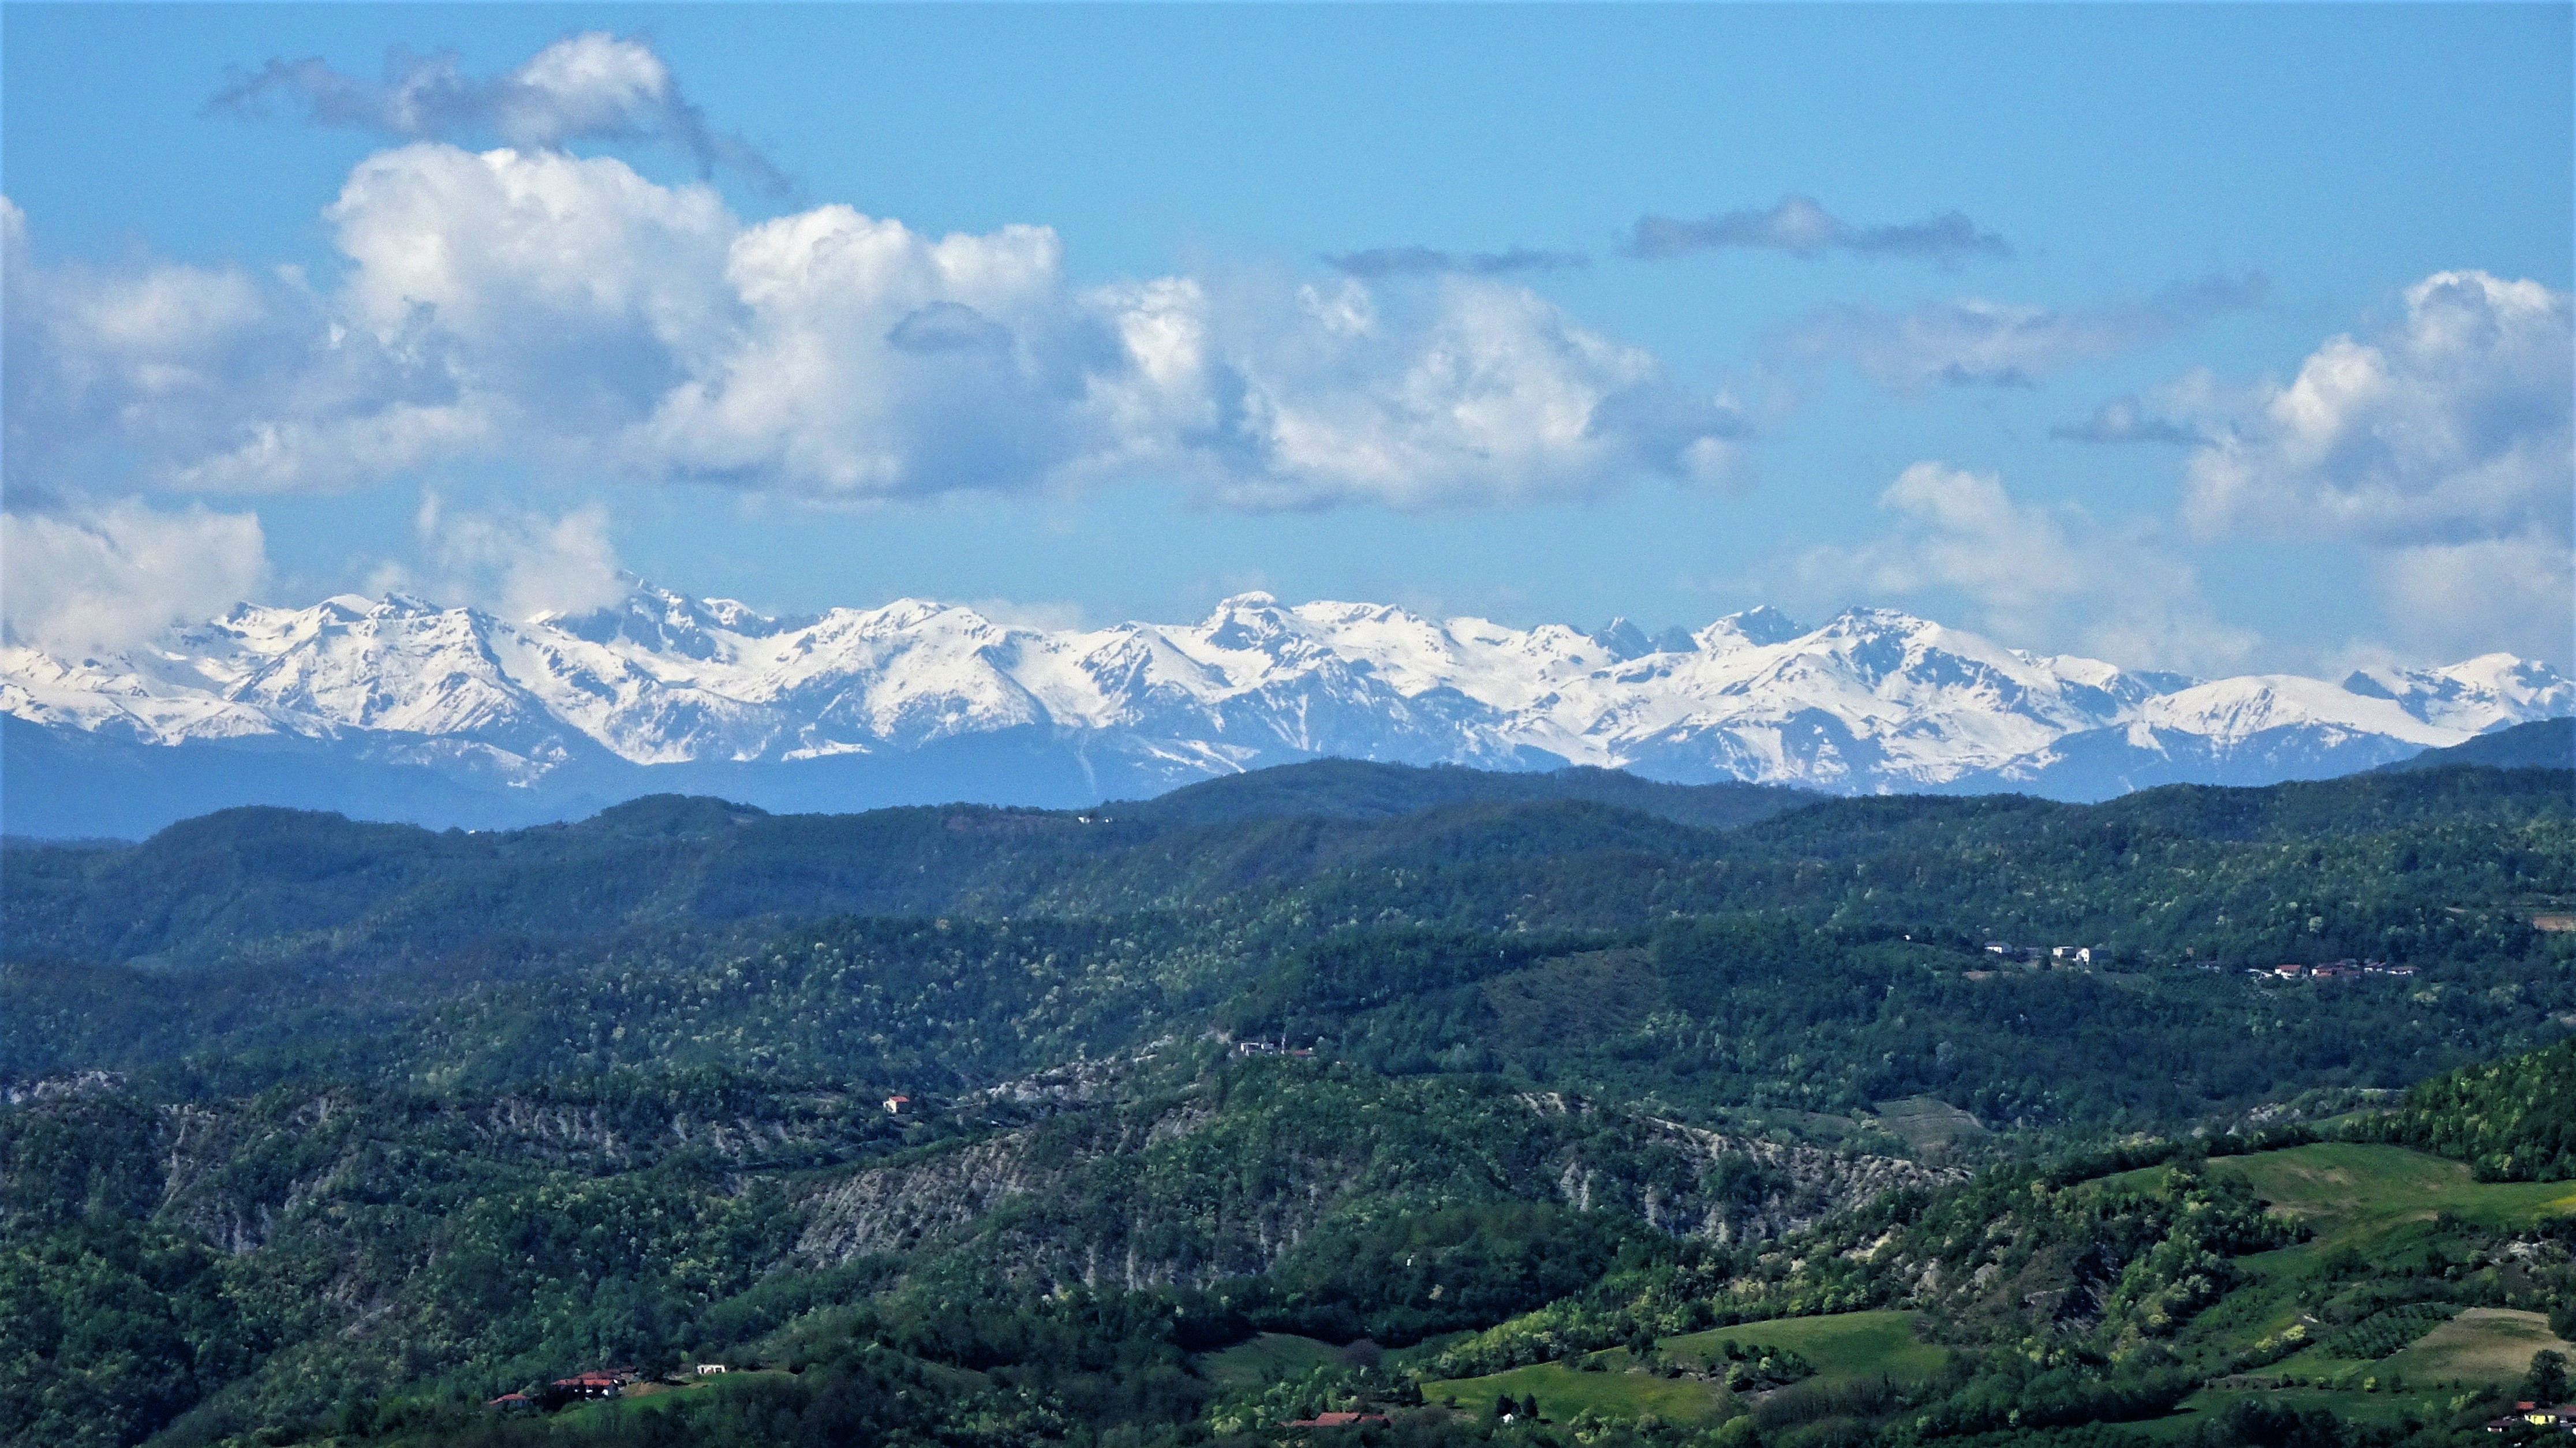 Piedmont off the Beaten Track - View on the road between Montechiaro Alto and Turpino